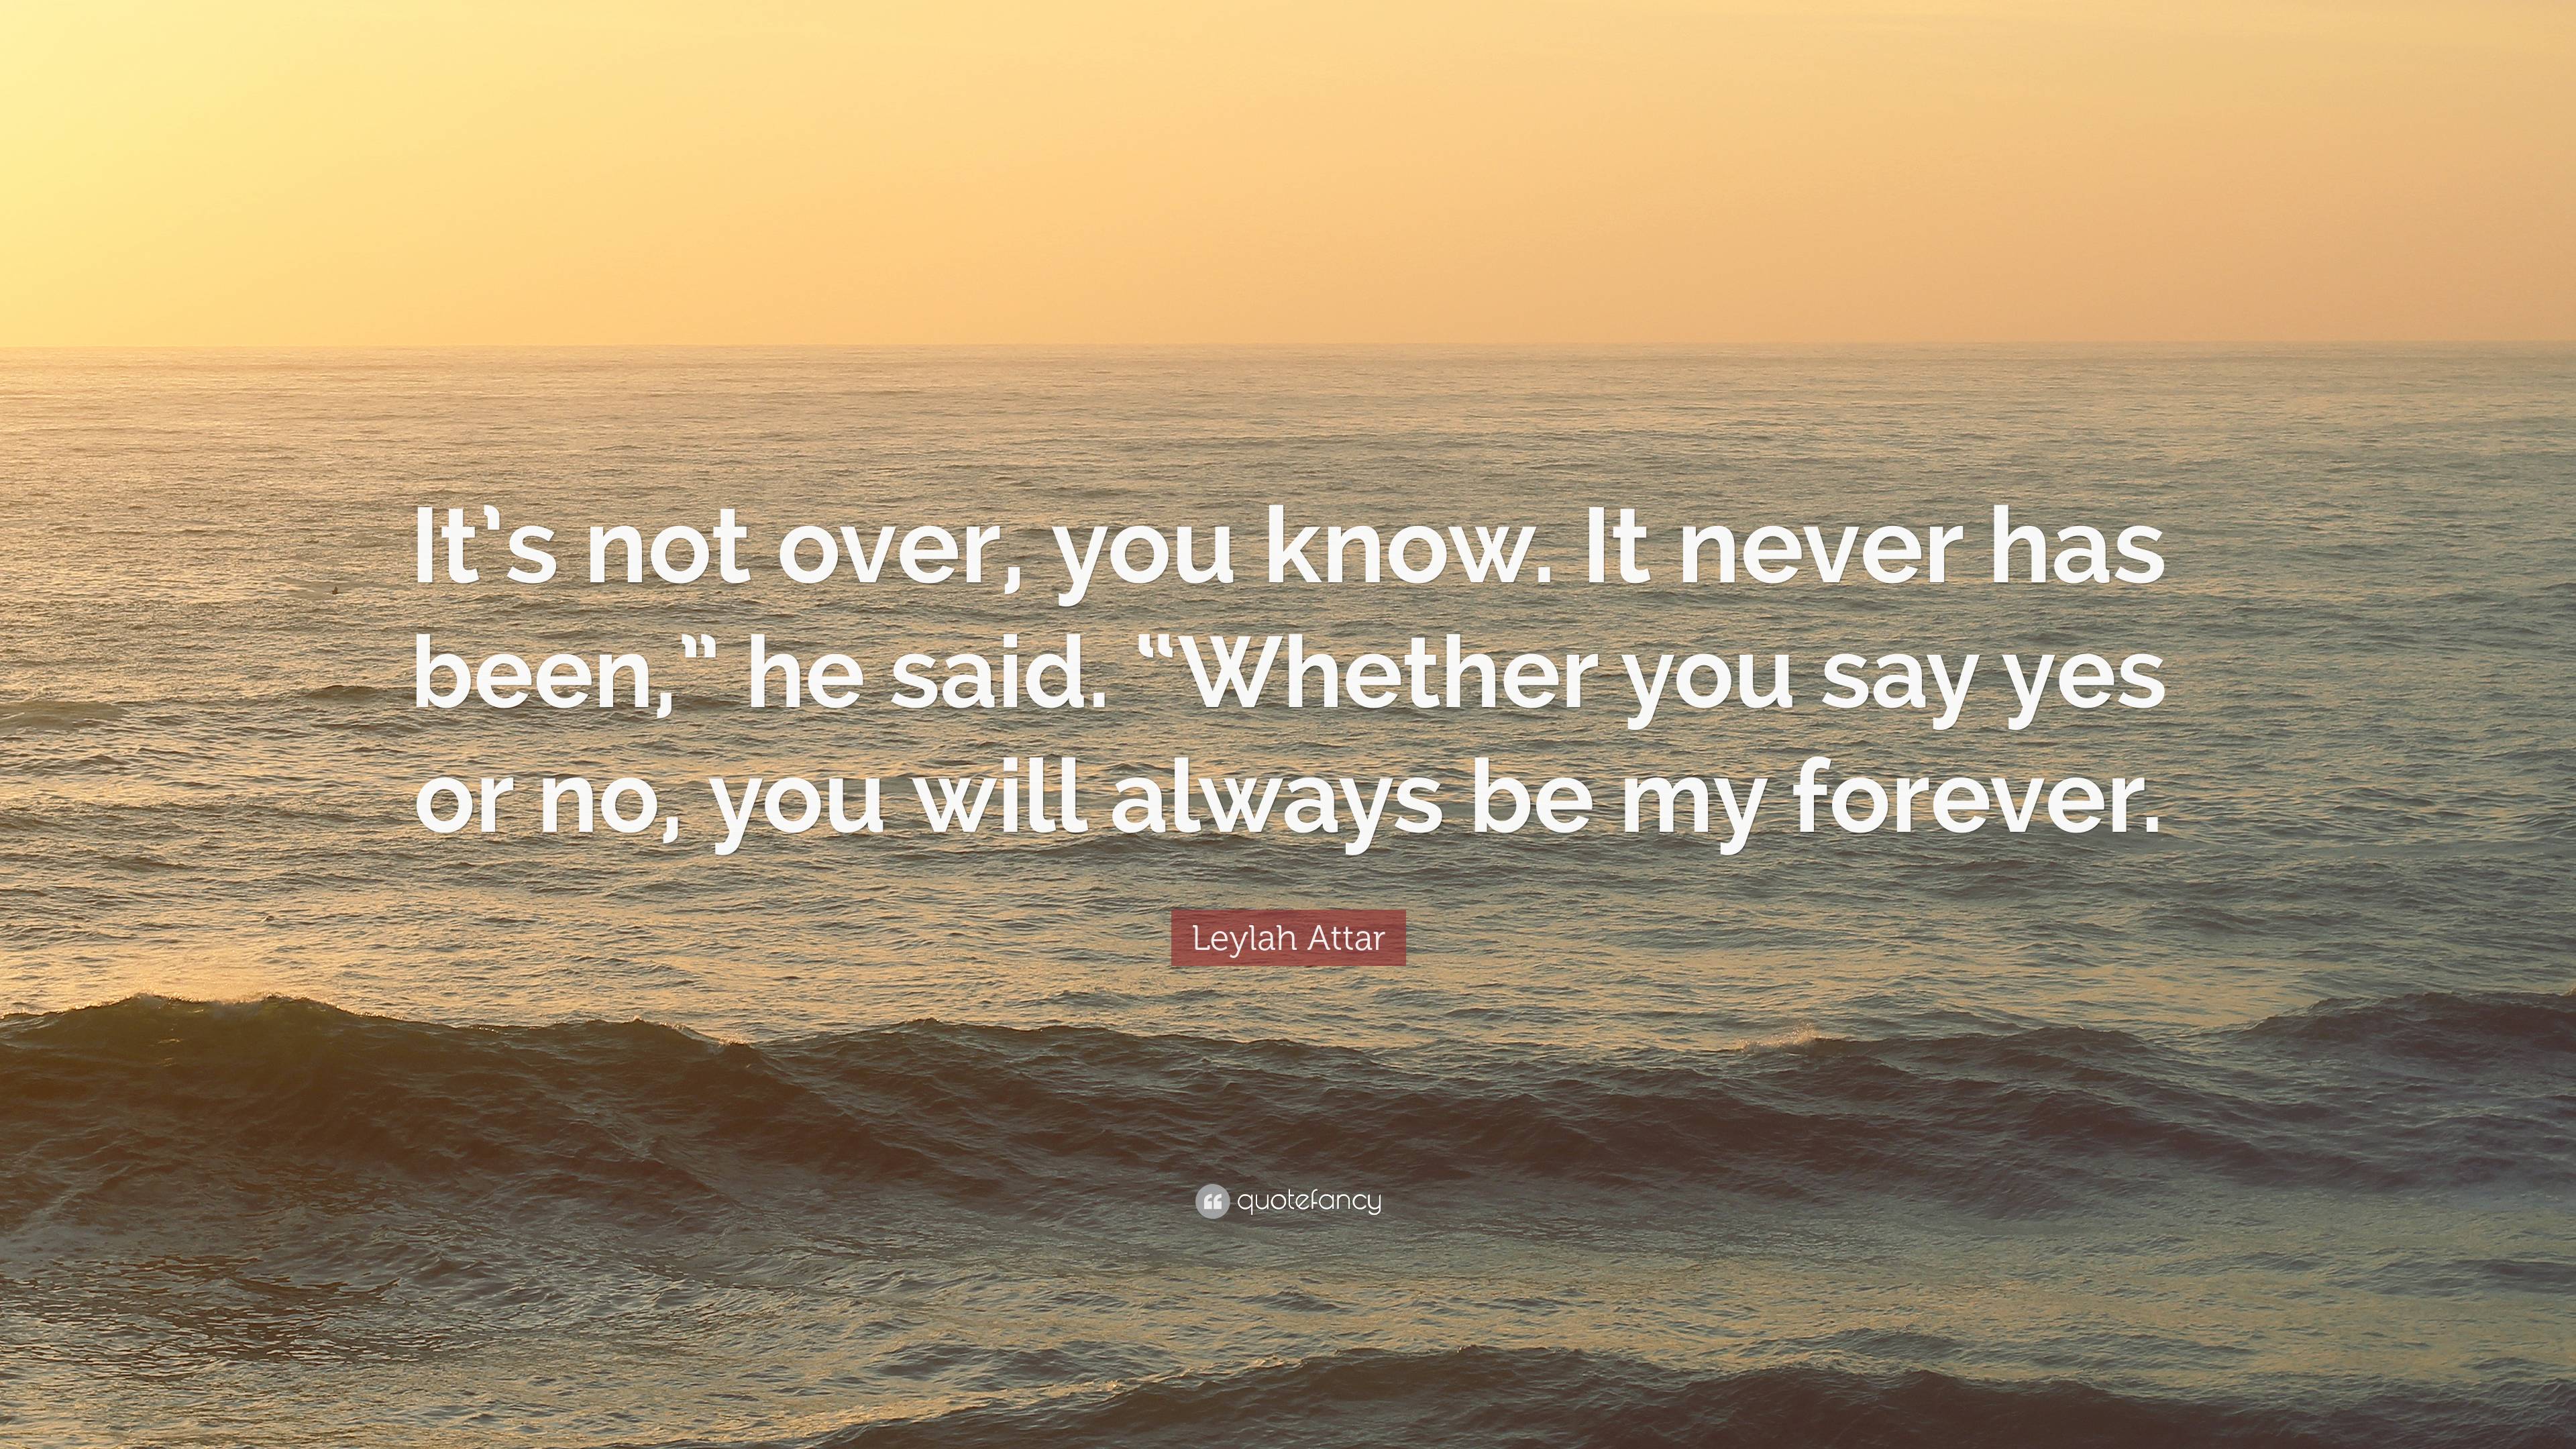 Leylah Attar Quote “its Not Over You Know It Never Has Been” He Said “whether You Say Yes 4556